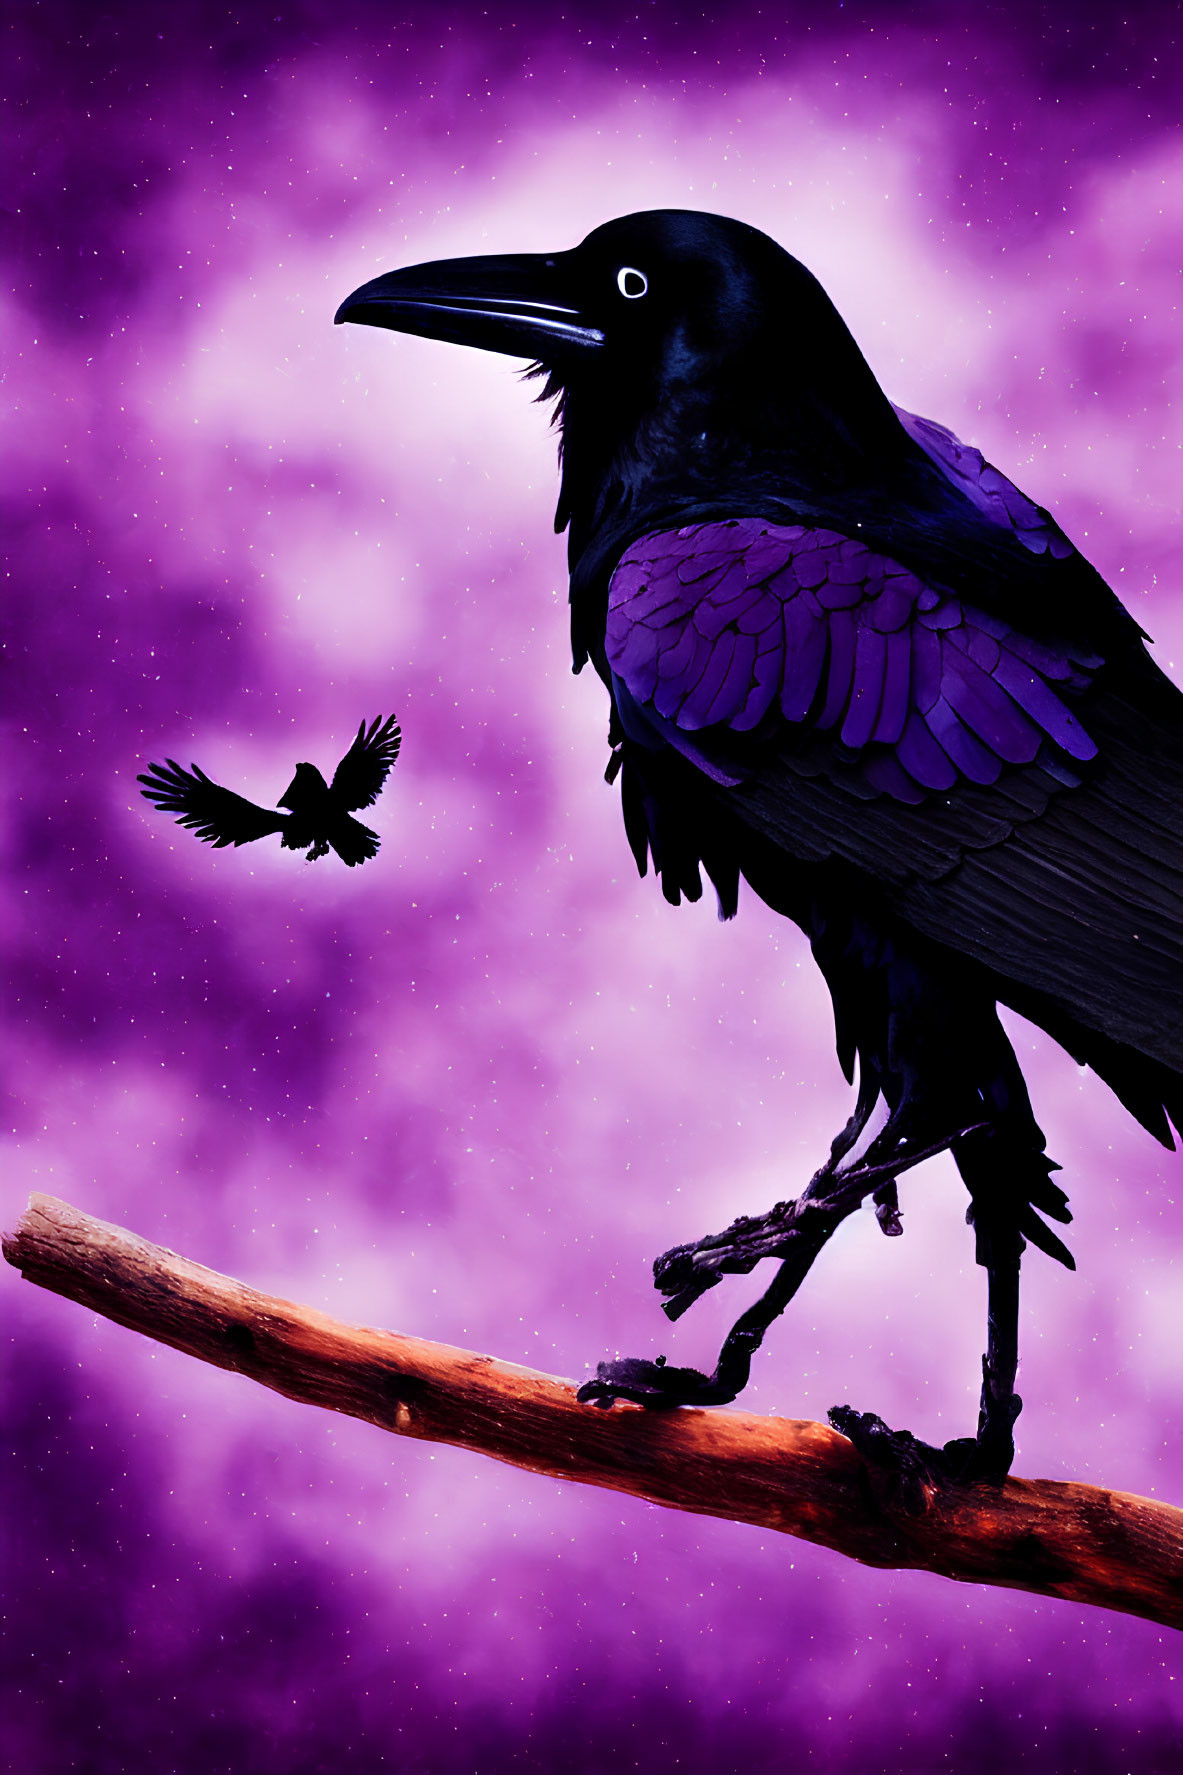 Silhouette of perched raven against purple starry sky with flying raven